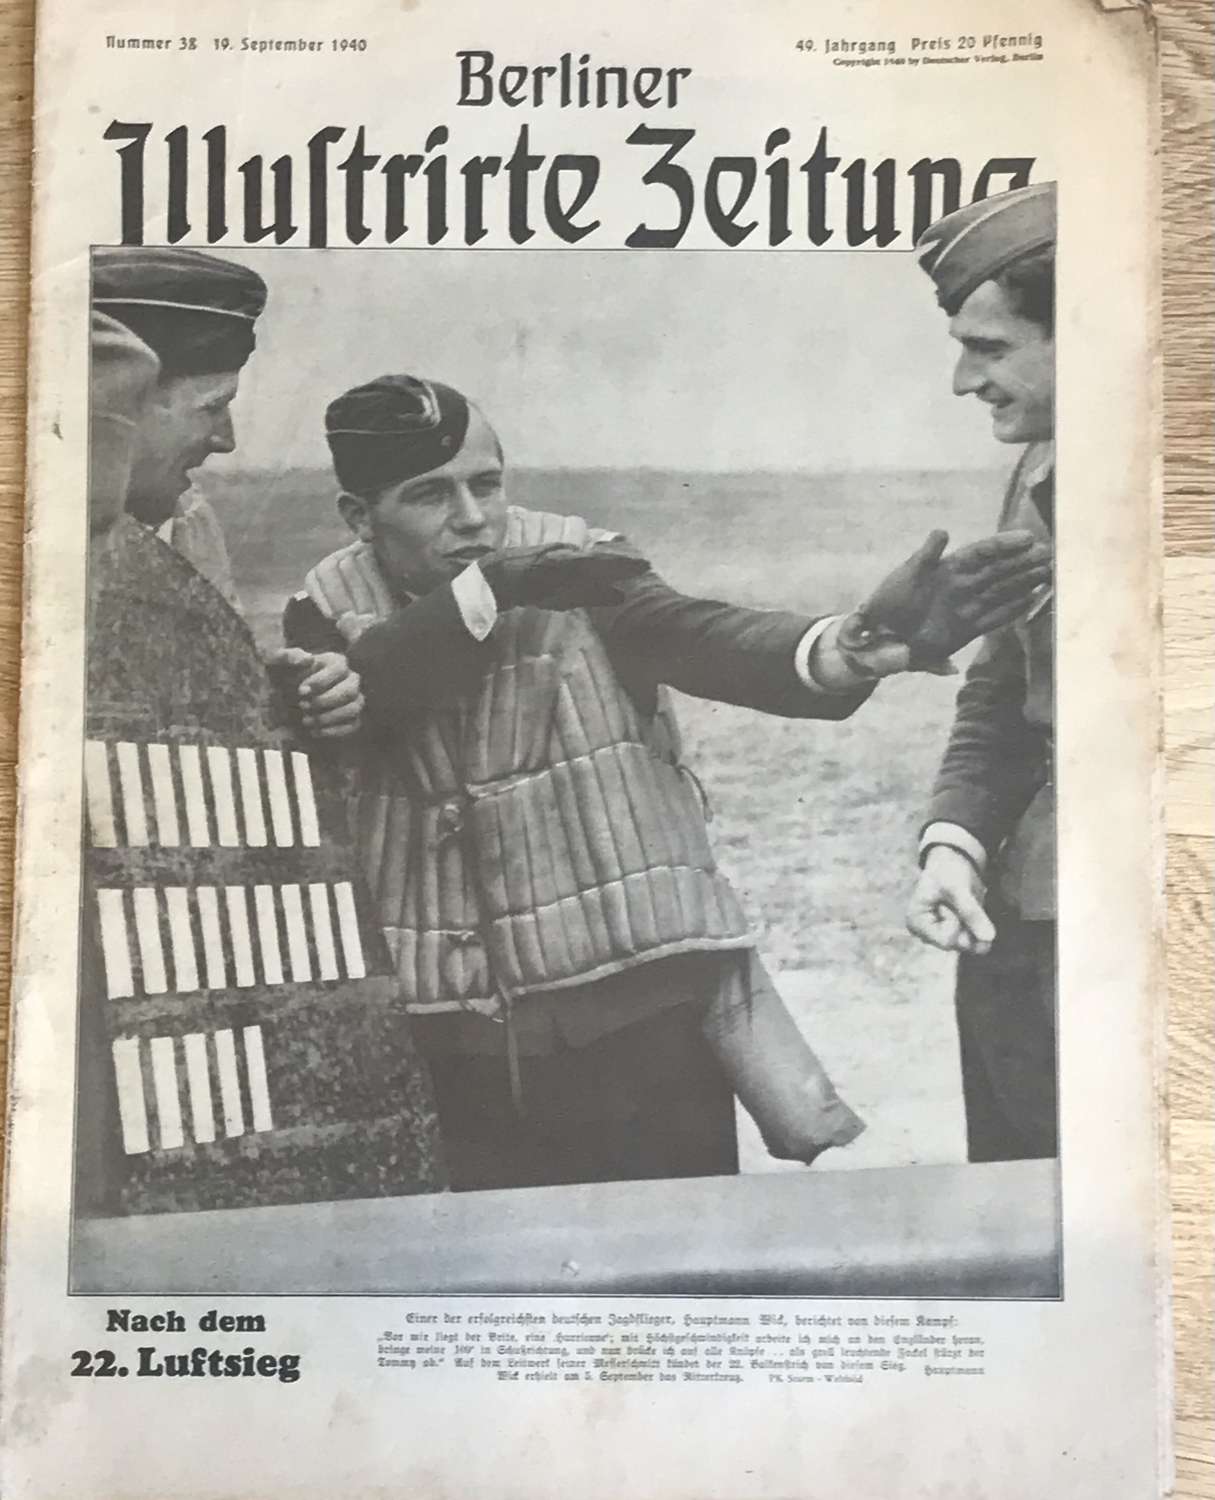 A copy of the Berlin, illustrated, news, September 1940